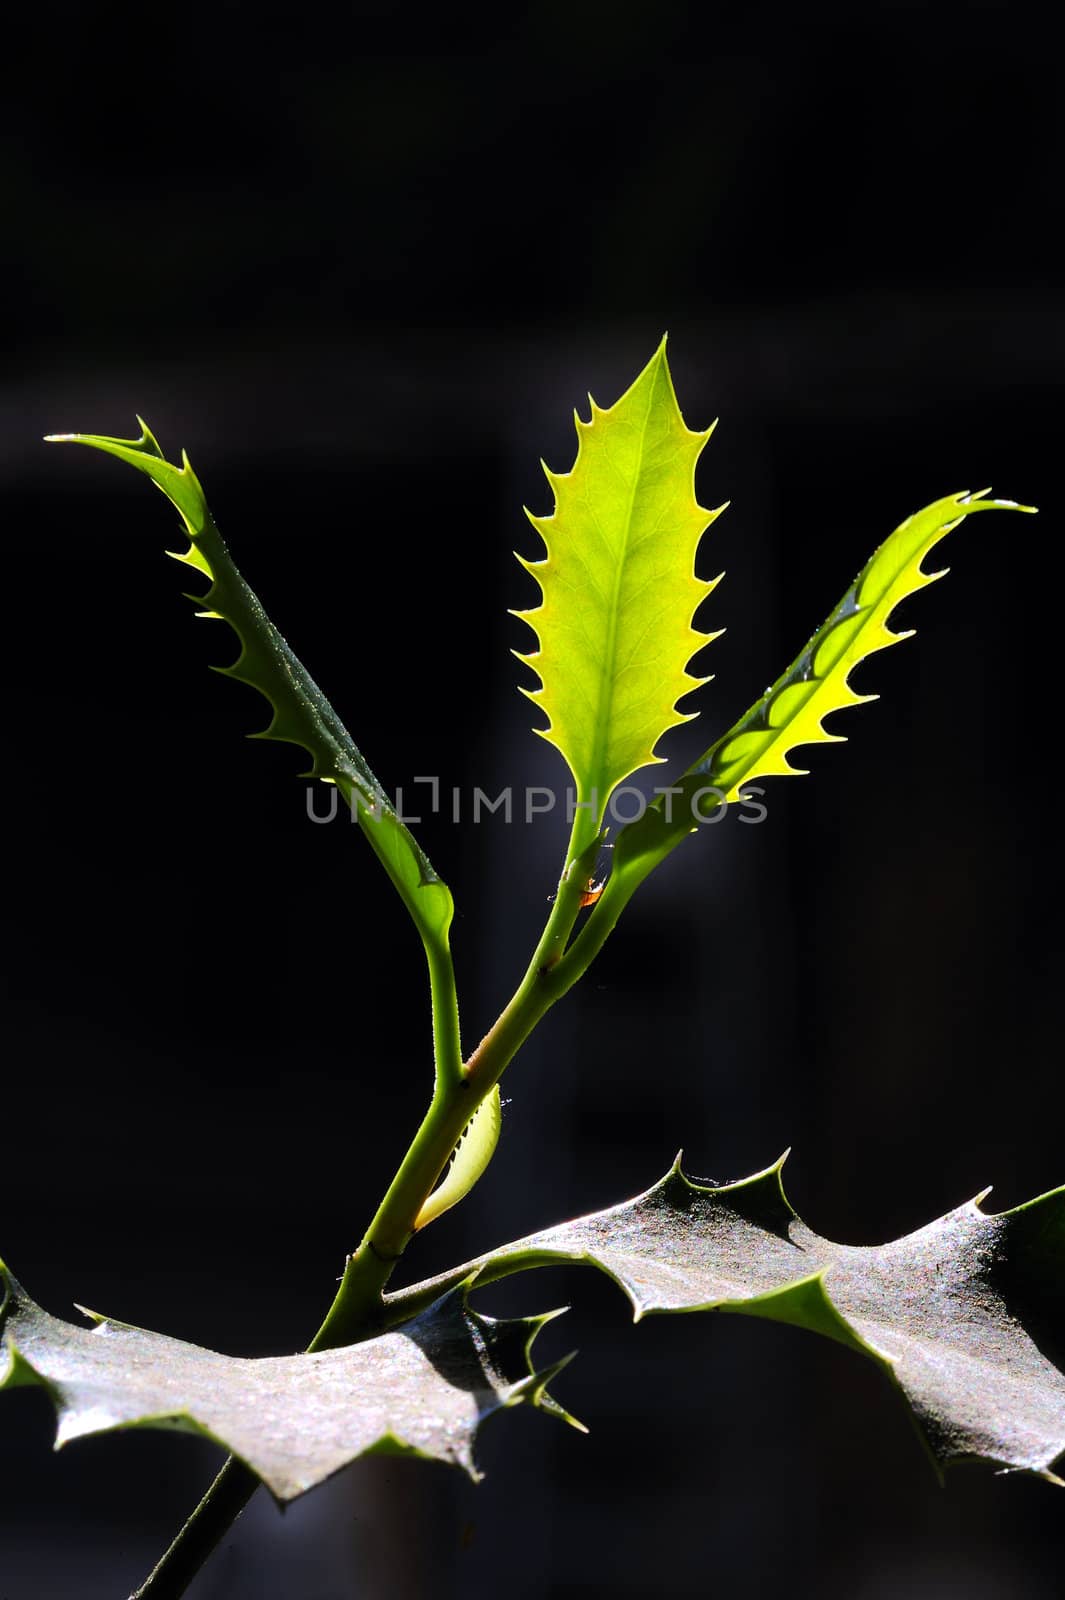 A fresh shoot of holly backlit against a black background